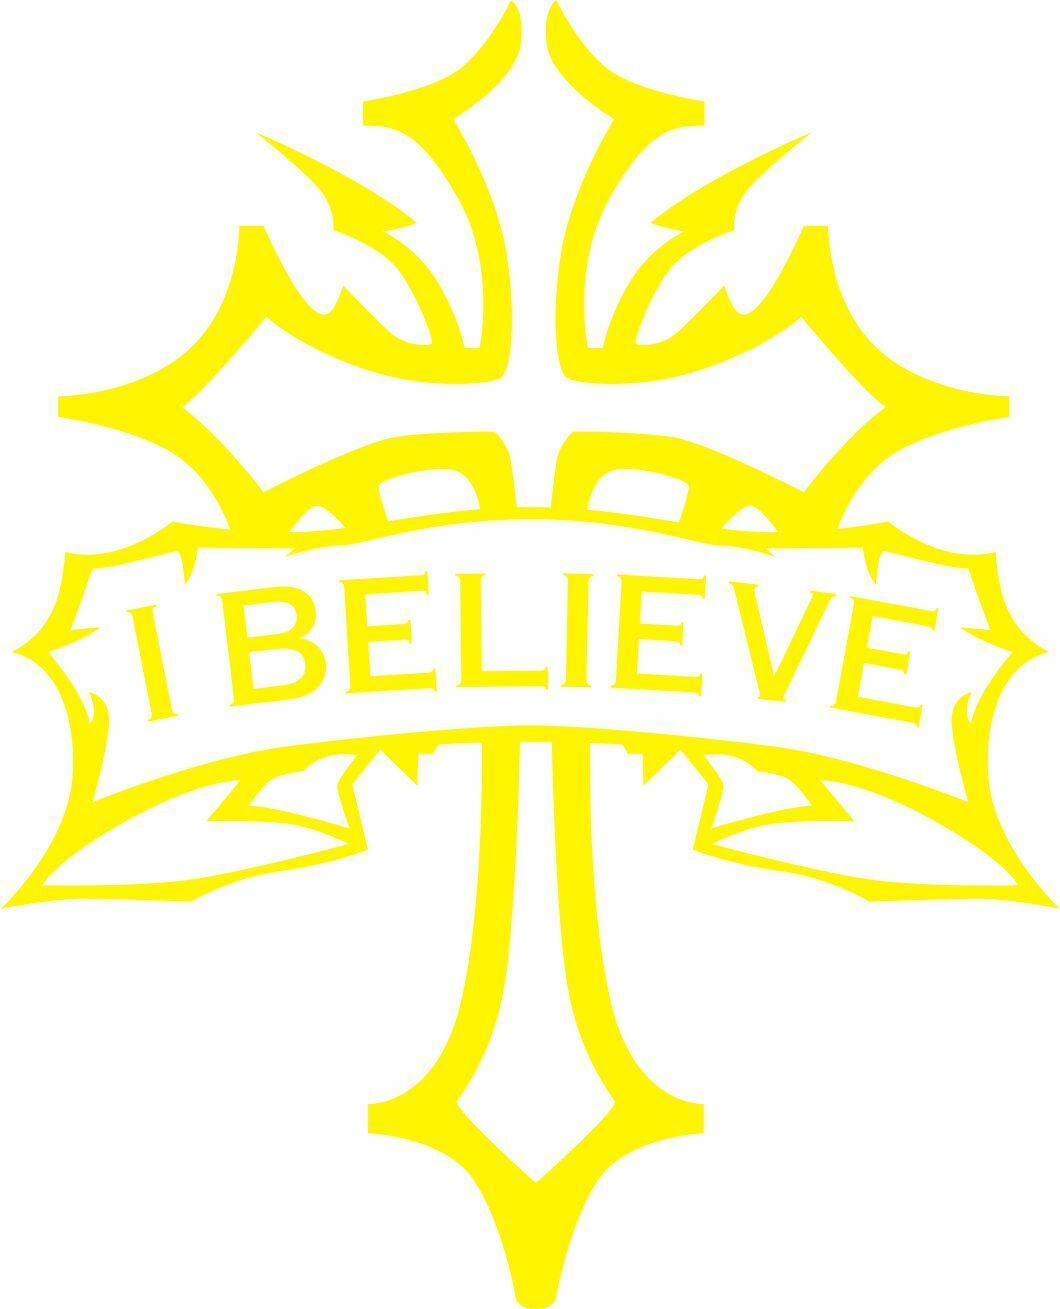 Religious Decal Christian Cross I Believe Exterior Window Various Size and Color - Powercall Sirens LLC